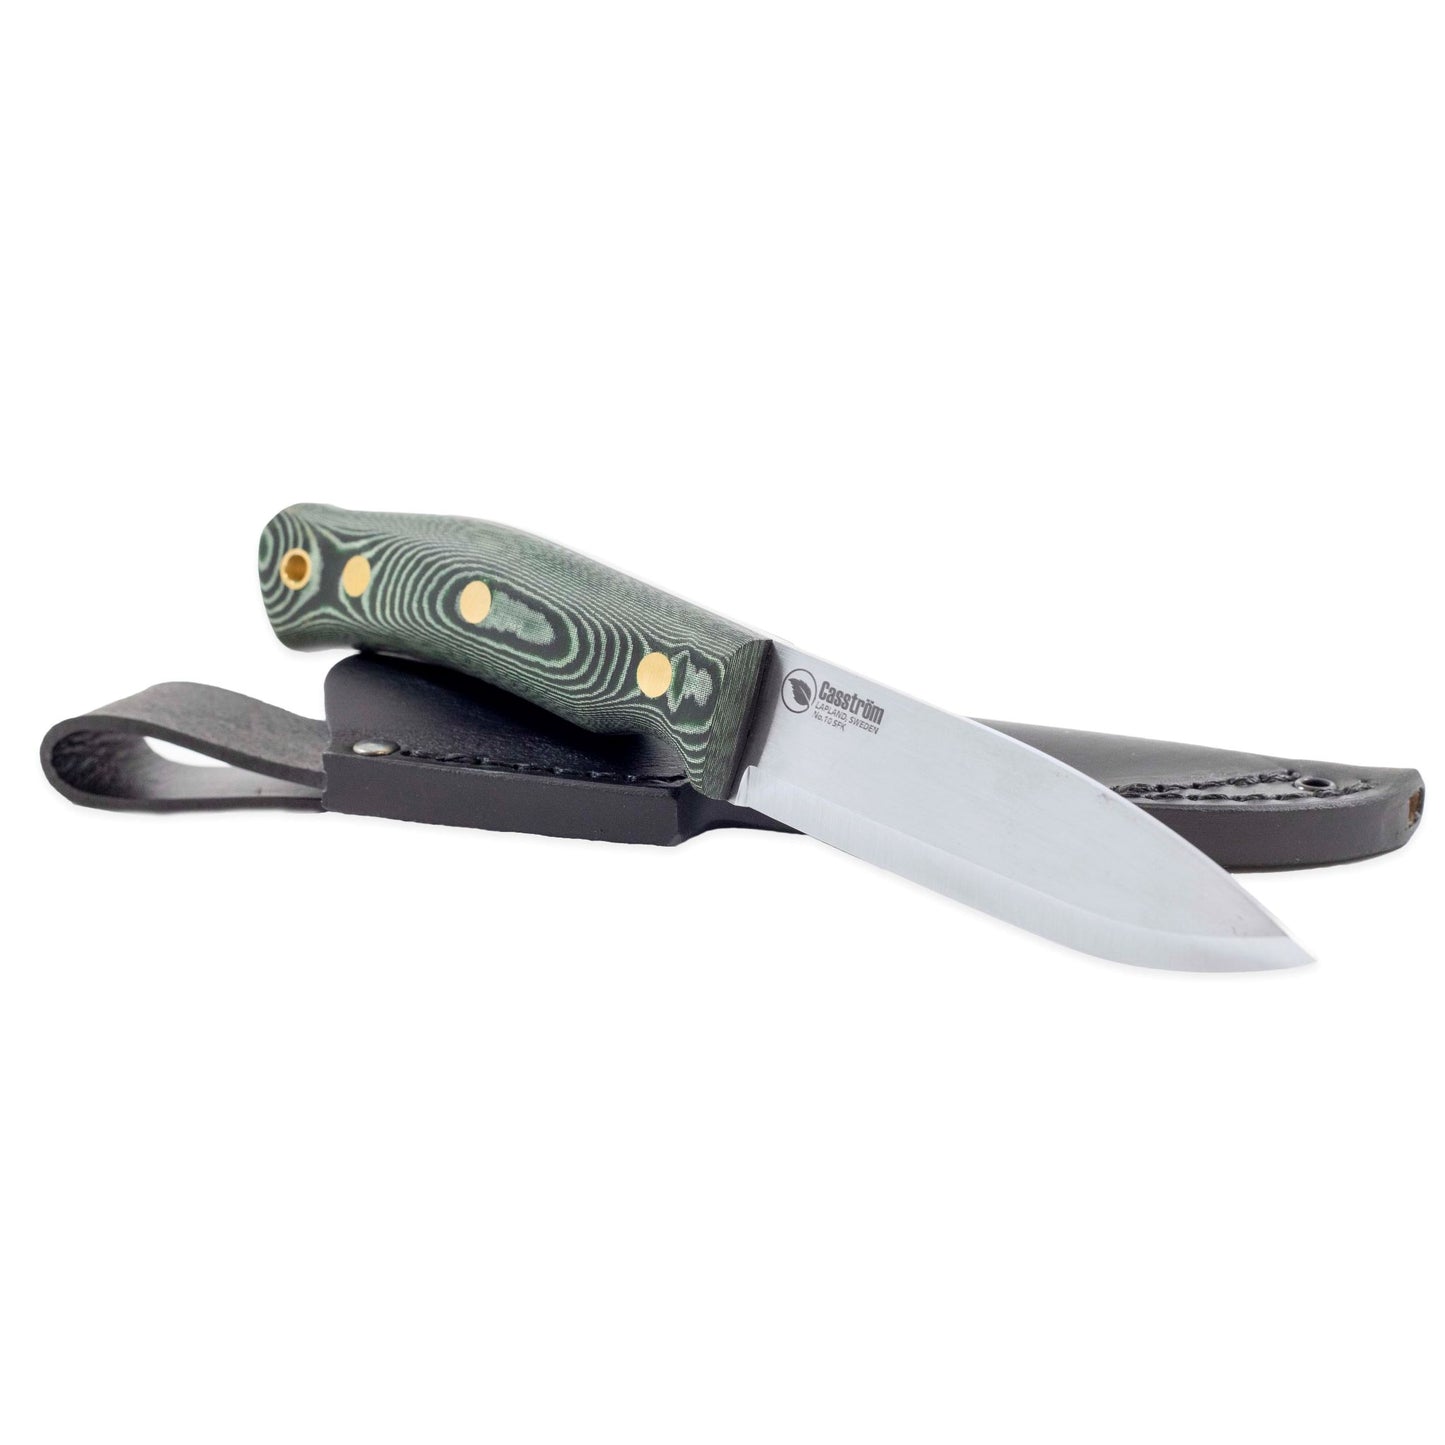 Casström No.10 SFK with green micarta handle and black leather sheath